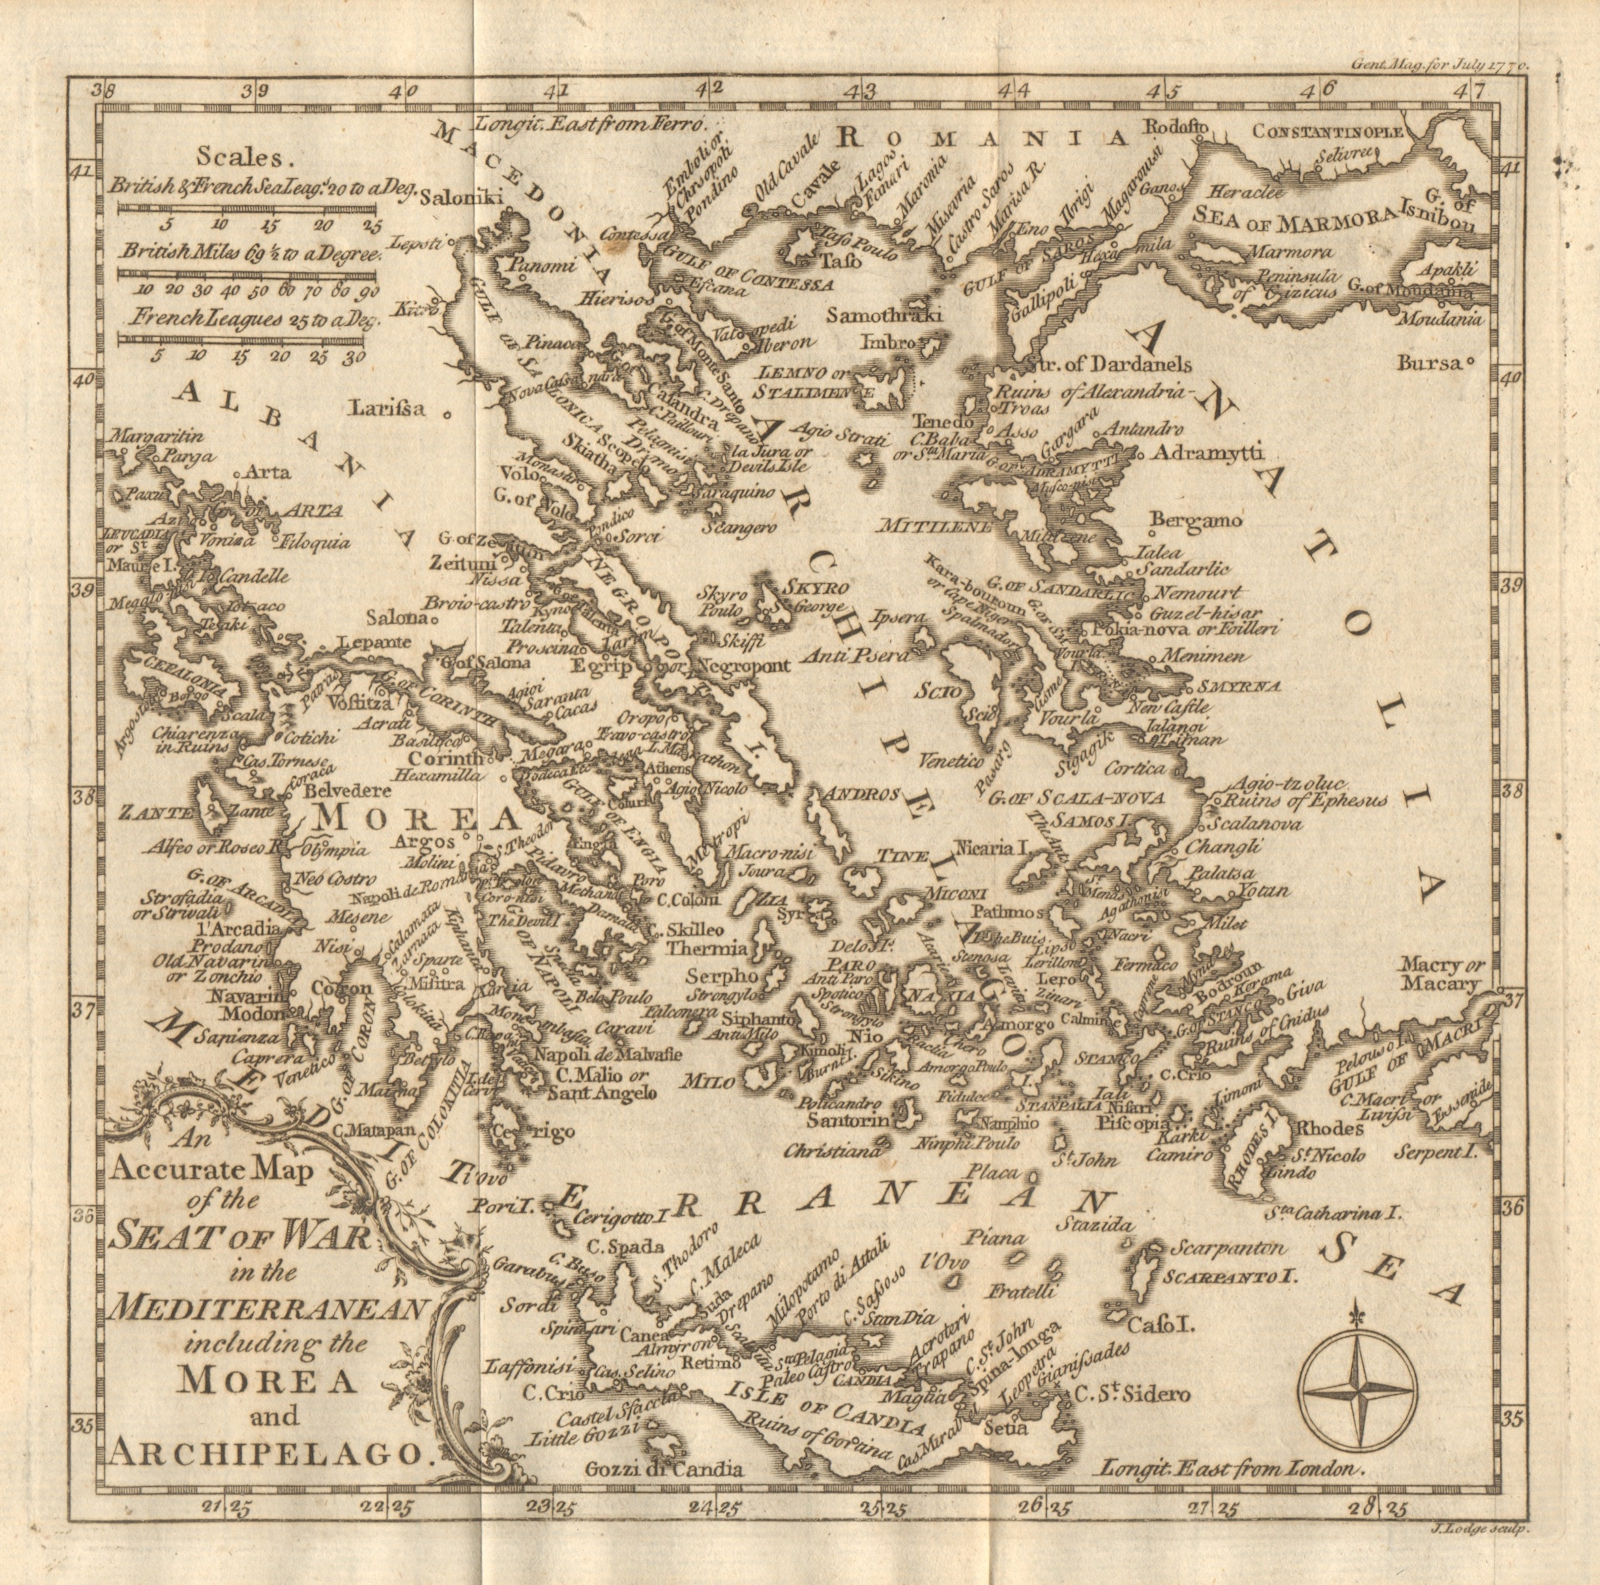 Associate Product The Seat of War in the Mediterranean. Morea. Greece & the Aegean. LODGE 1770 map